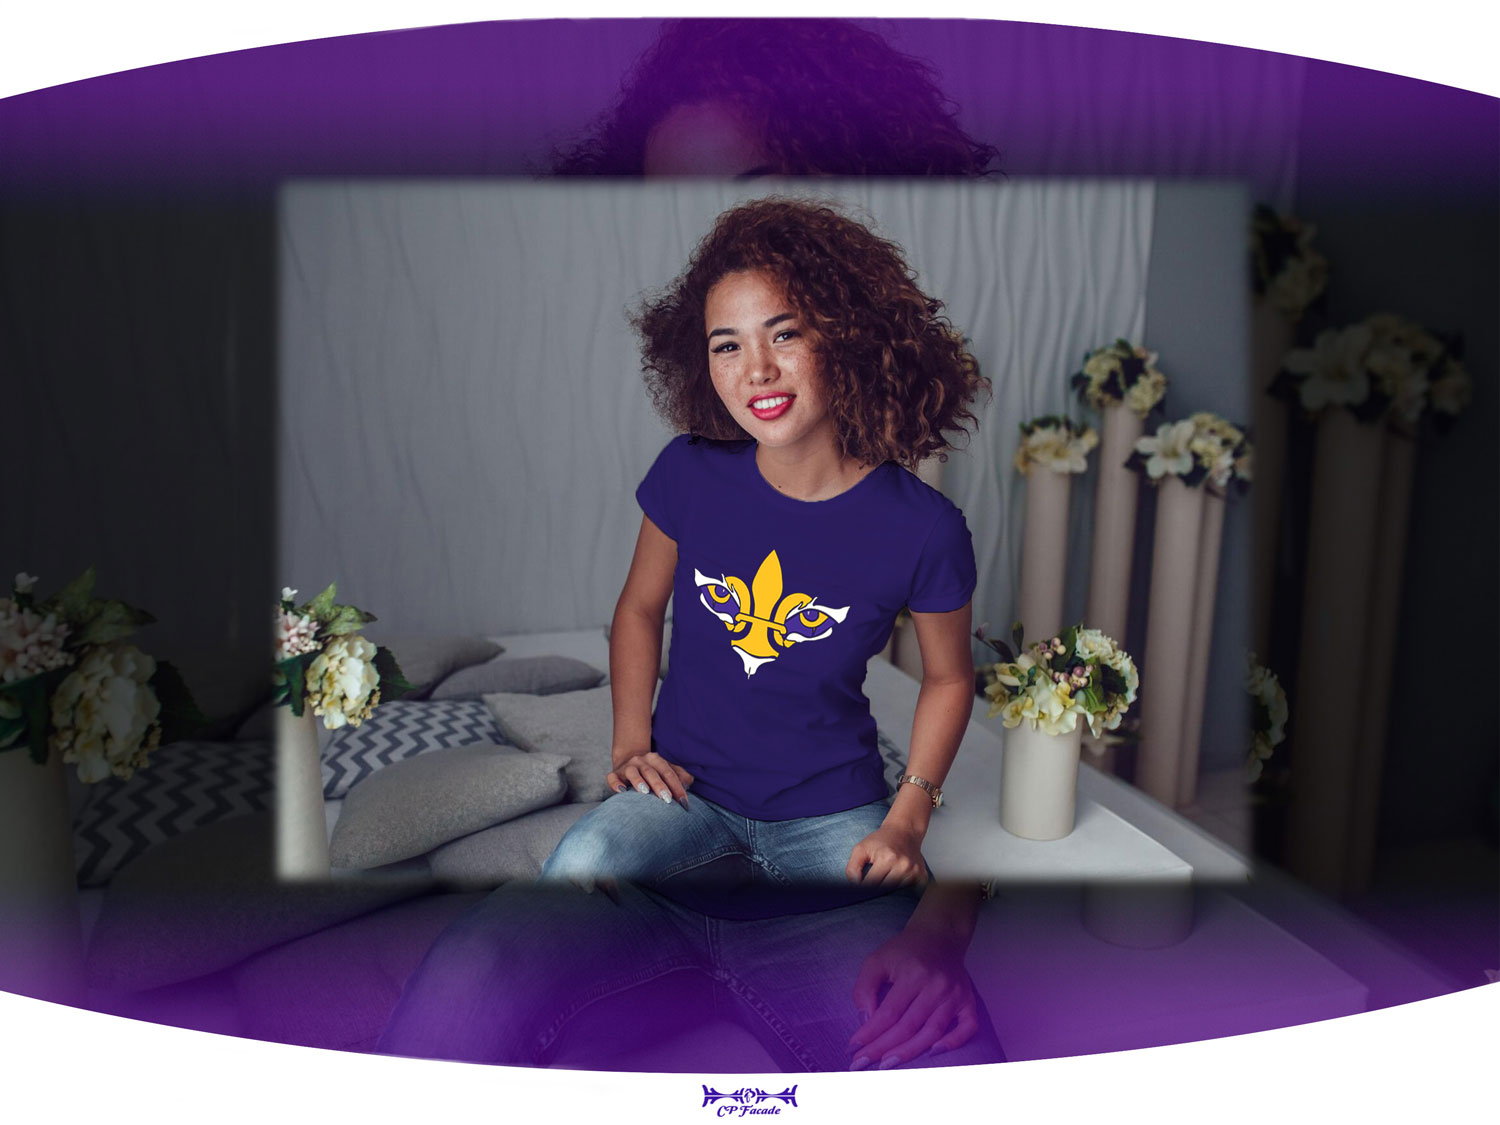 Woman sitting on bed smiling wearing purple LSU female fitted tee with a gold and white fleur de lis with tiger eyes on the chest